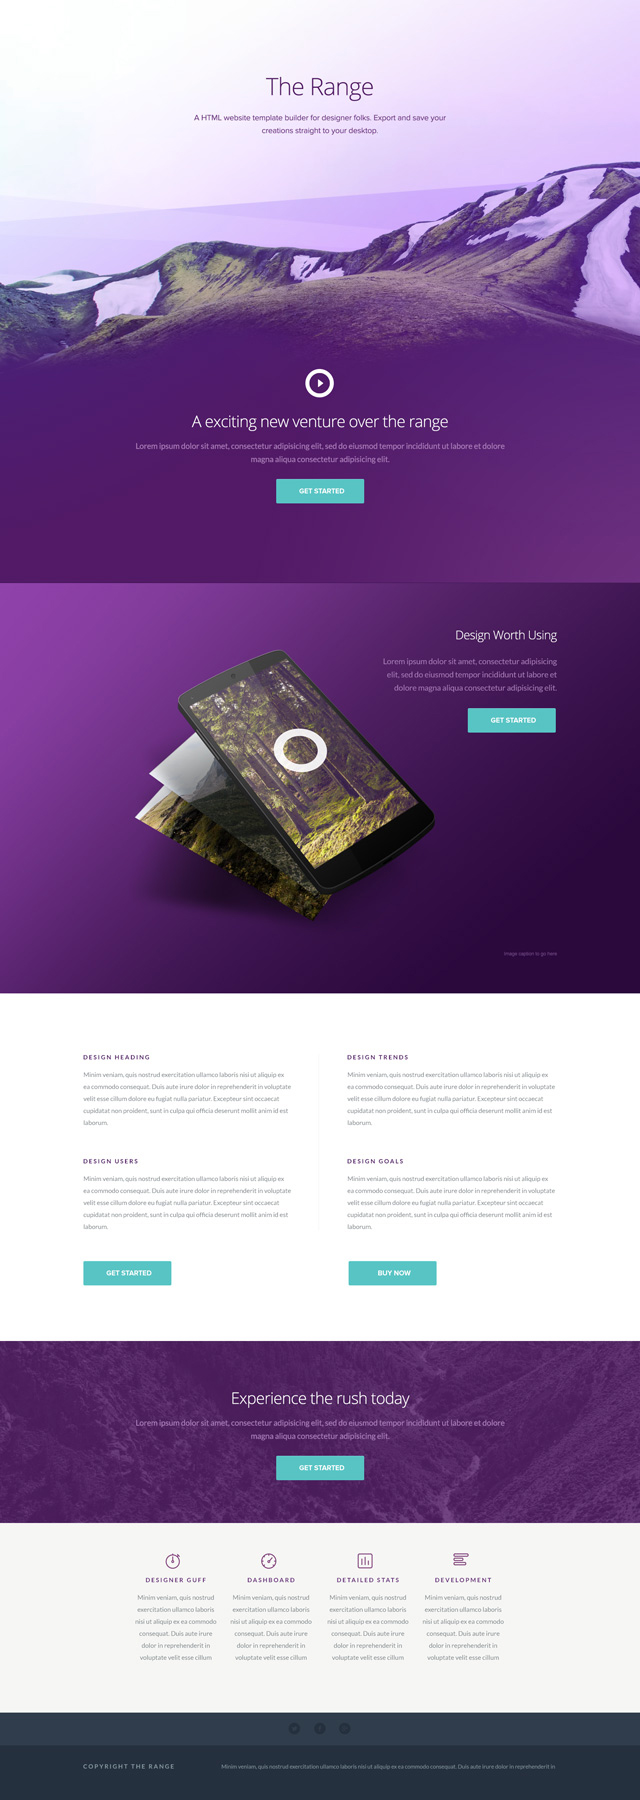 The Range - Single Pager Website Template PSD